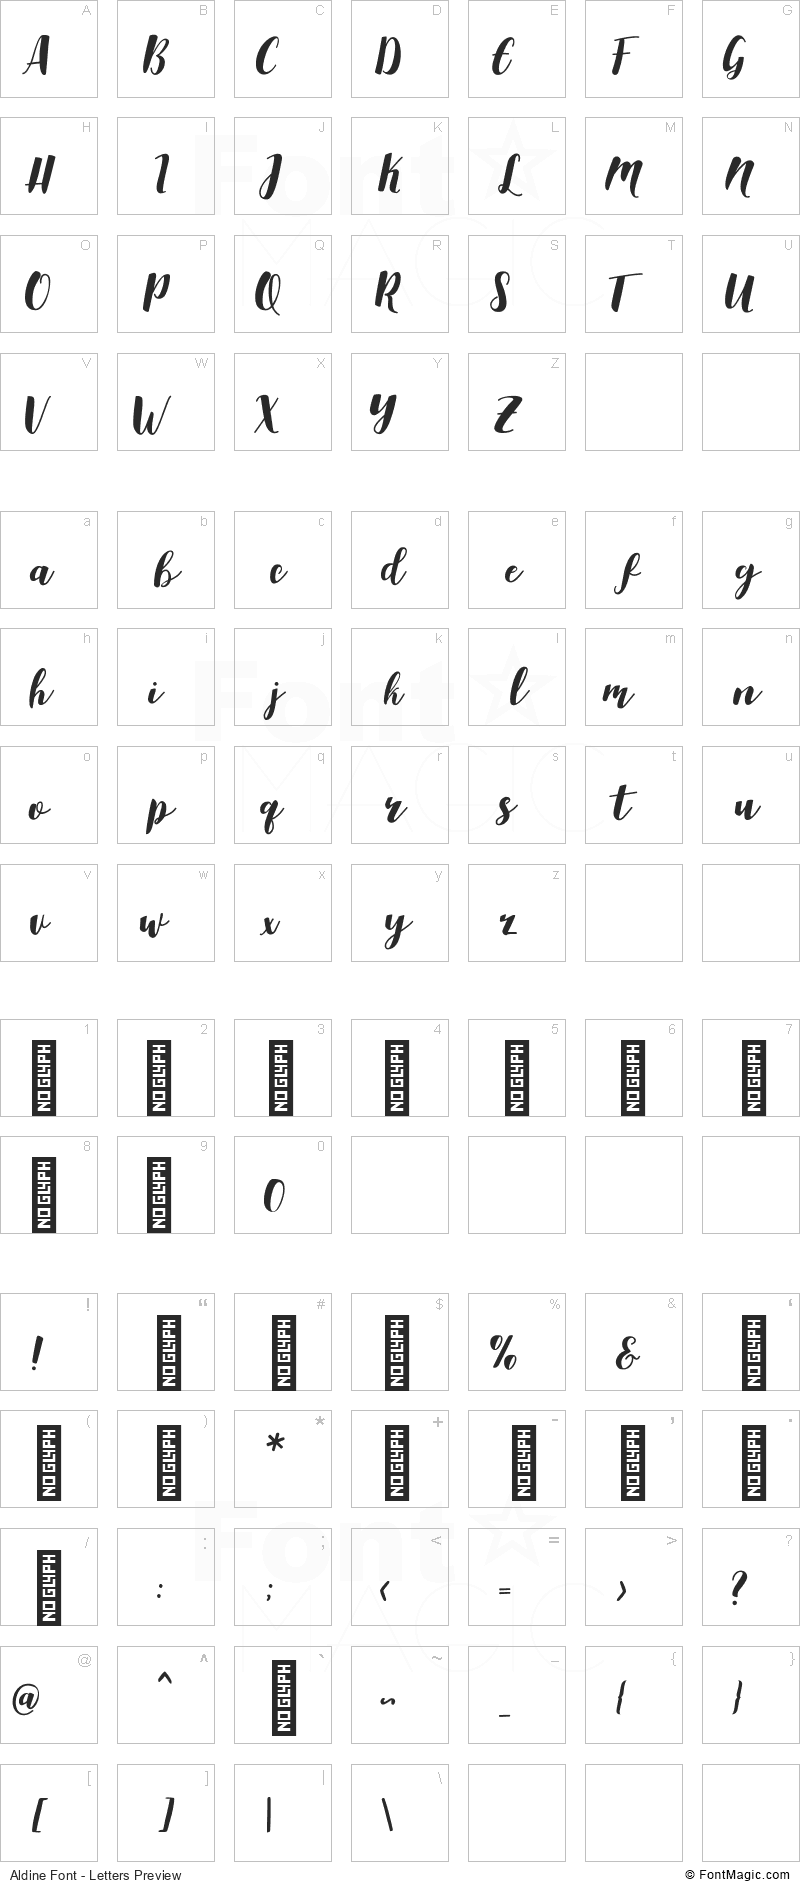 Aldine Font - All Latters Preview Chart